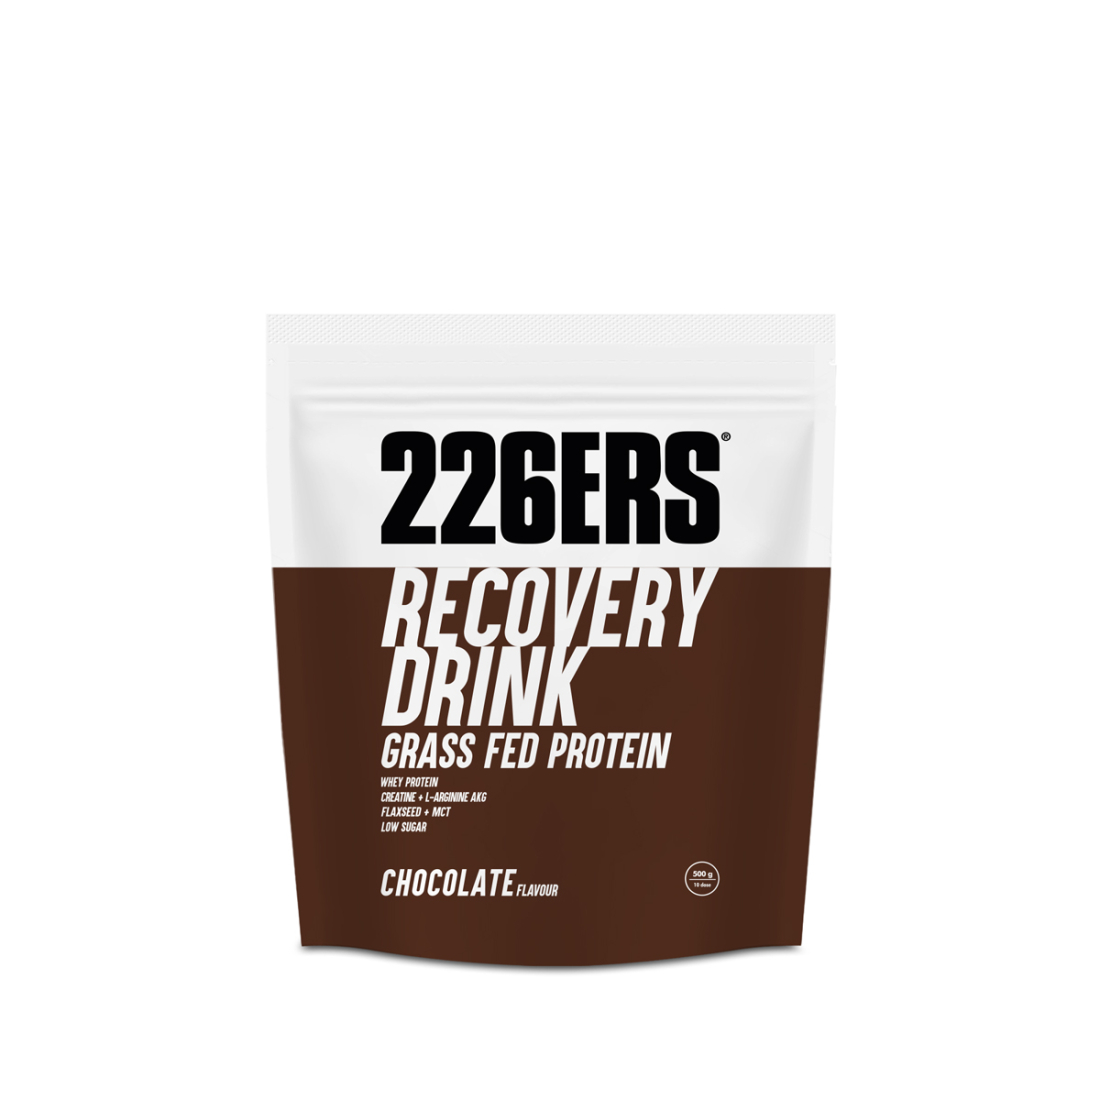 RECOVERY DRINK - Proteína Grass Fed -...